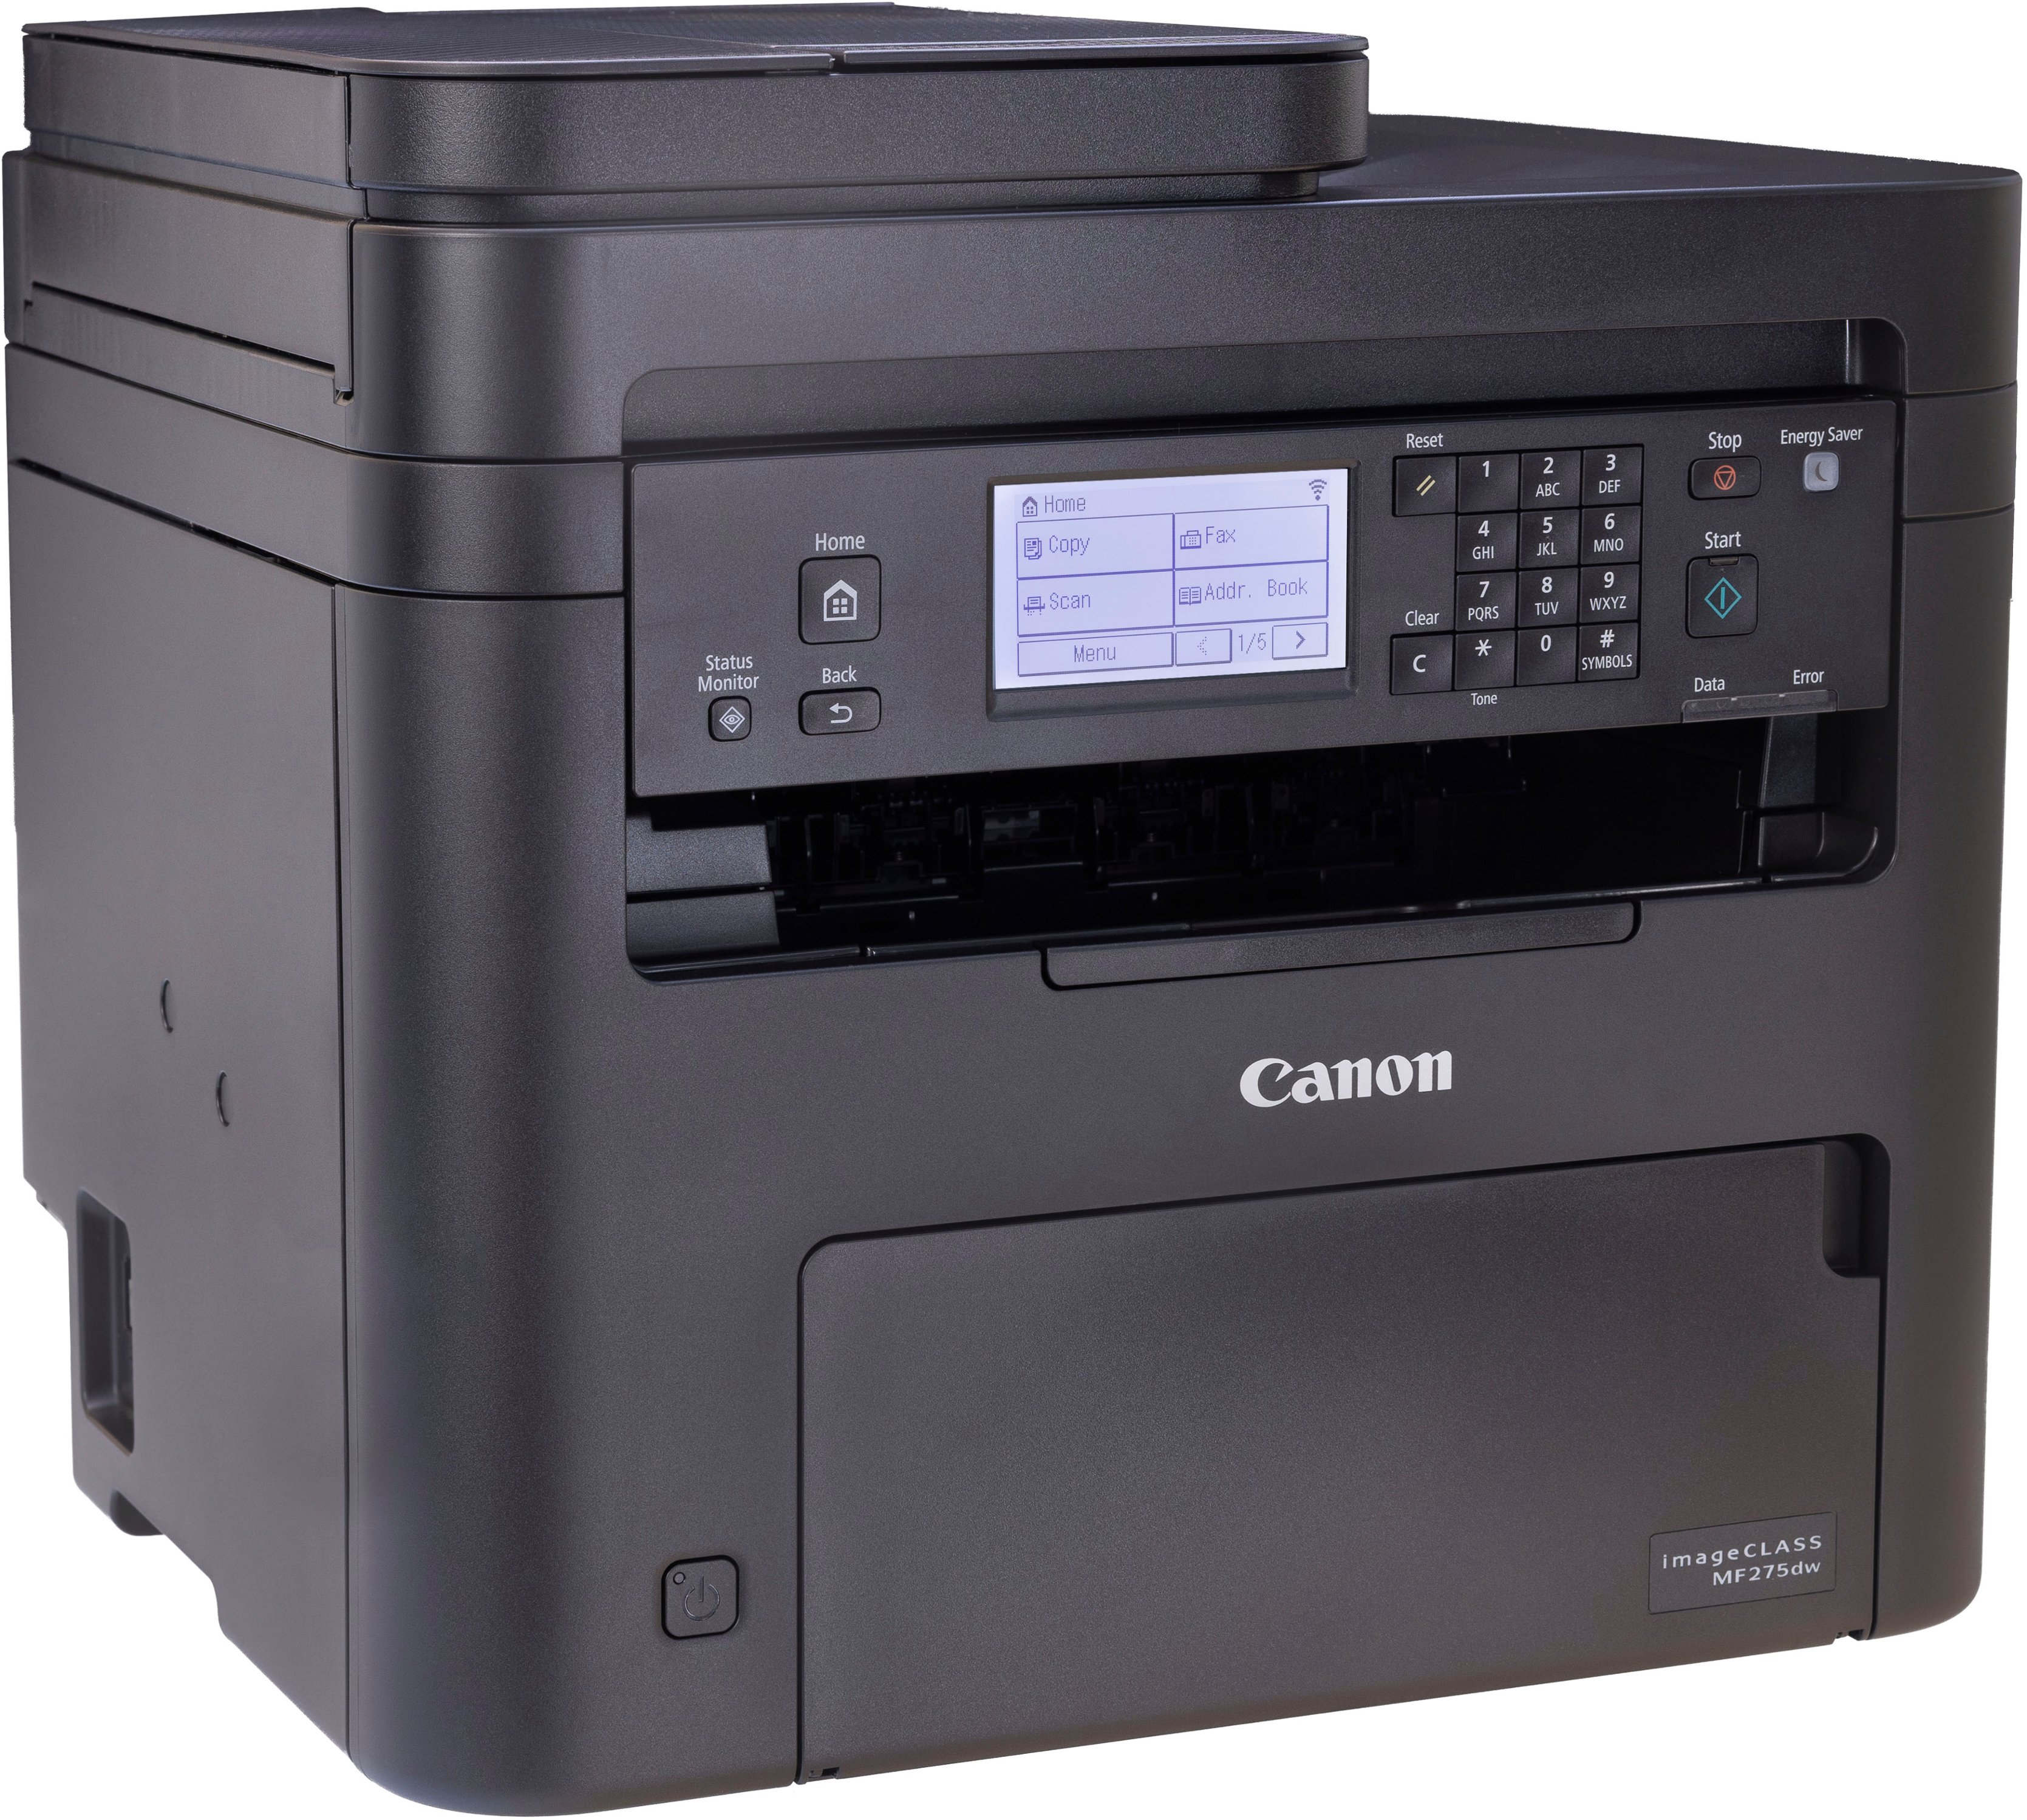 Angle View: Canon - imageCLASS MF275dw Wireless Black-and-White All-In-One Laser Printer with Fax - Black